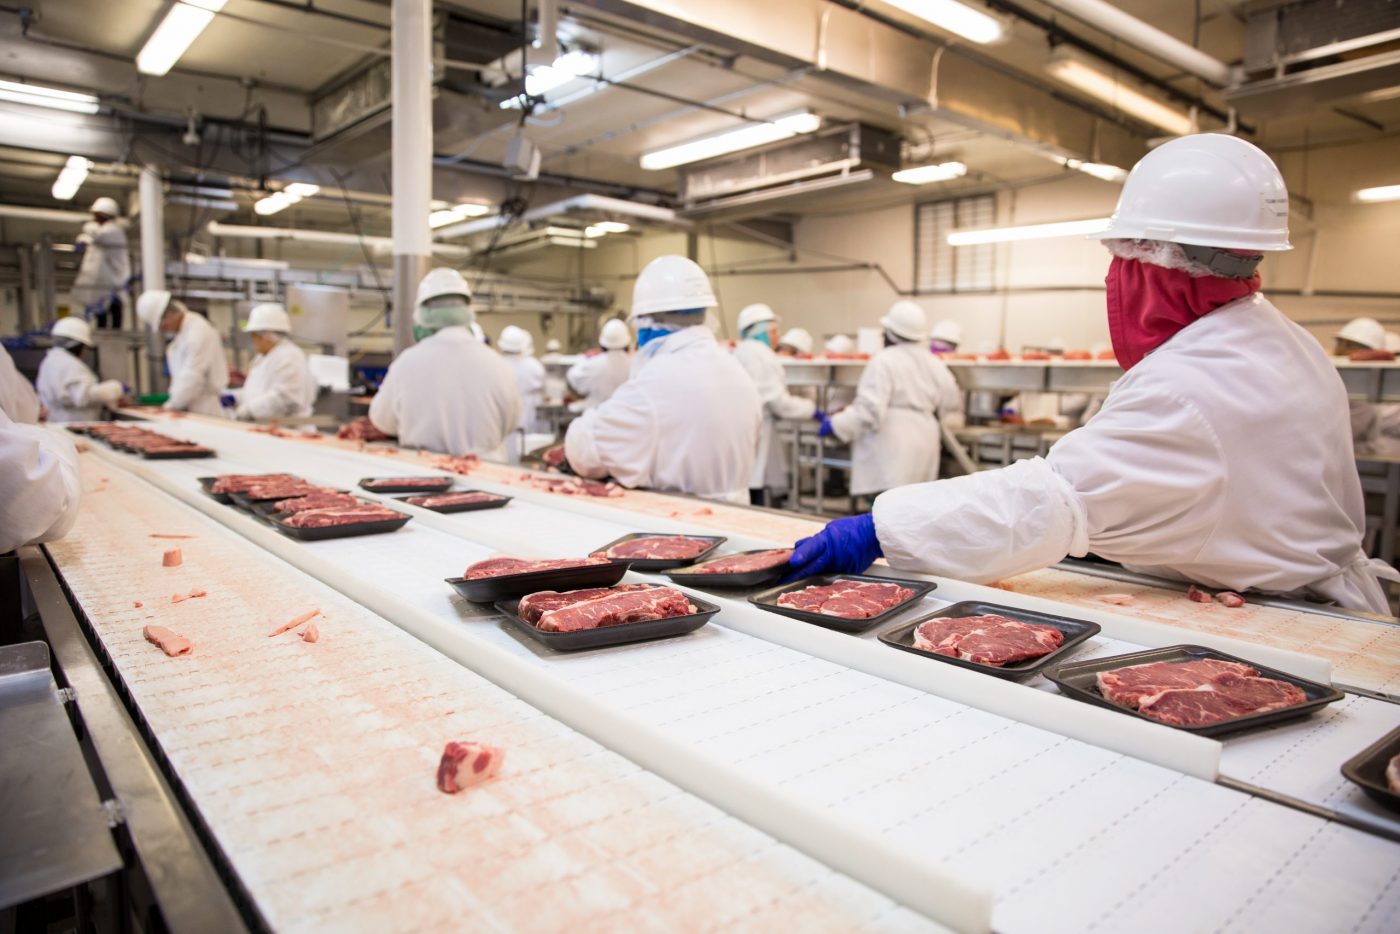 Workers handle meat organizing packing shipping loading at factory plant